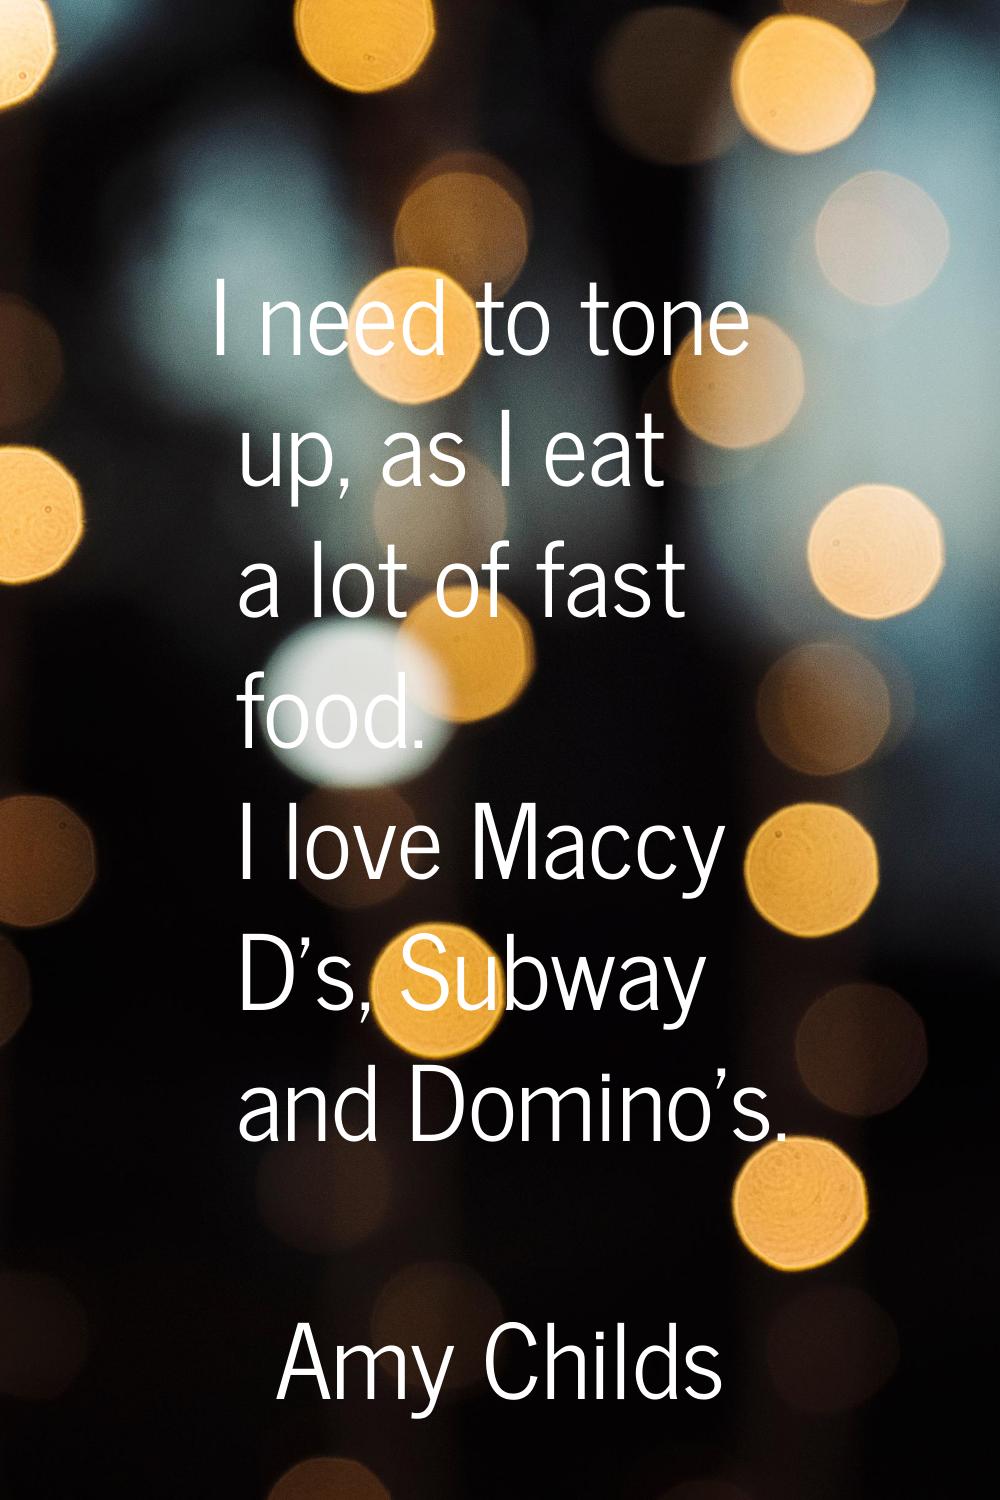 I need to tone up, as I eat a lot of fast food. I love Maccy D's, Subway and Domino's.